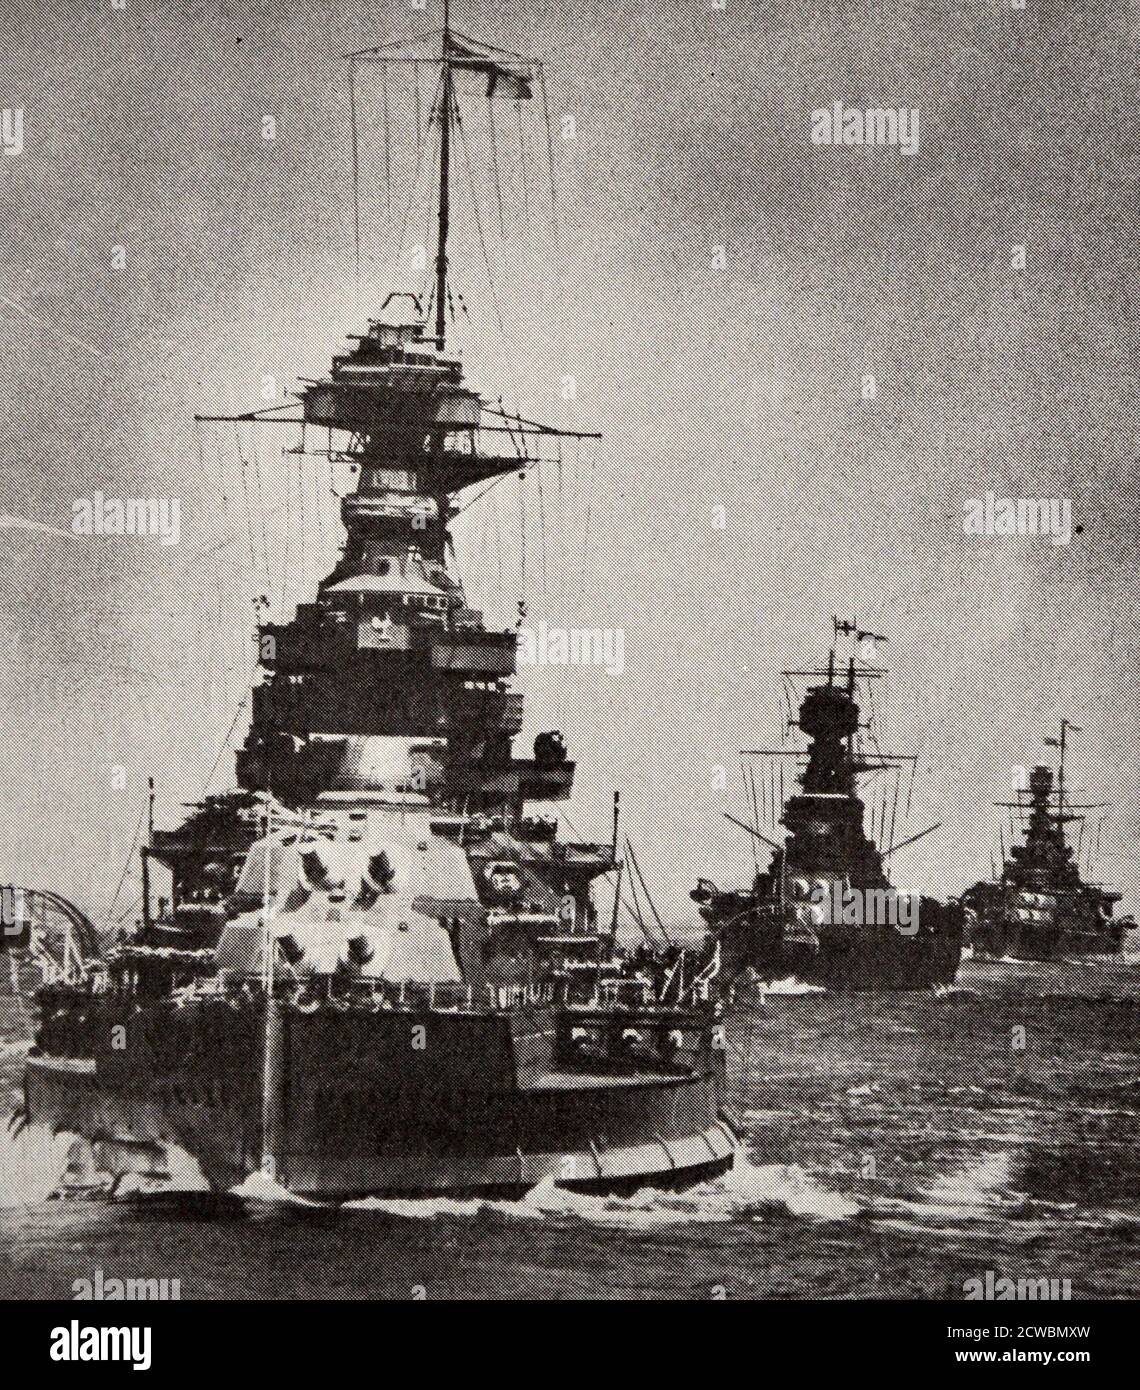 Black and white photograph of World War II (1939-1945); heavy ships from the Home Fleet of the British Navy, showing the 'Renown' and the 'Hood', considered the fastest ship in the British Navy which went into combat against the 'Bismarck'. Stock Photo